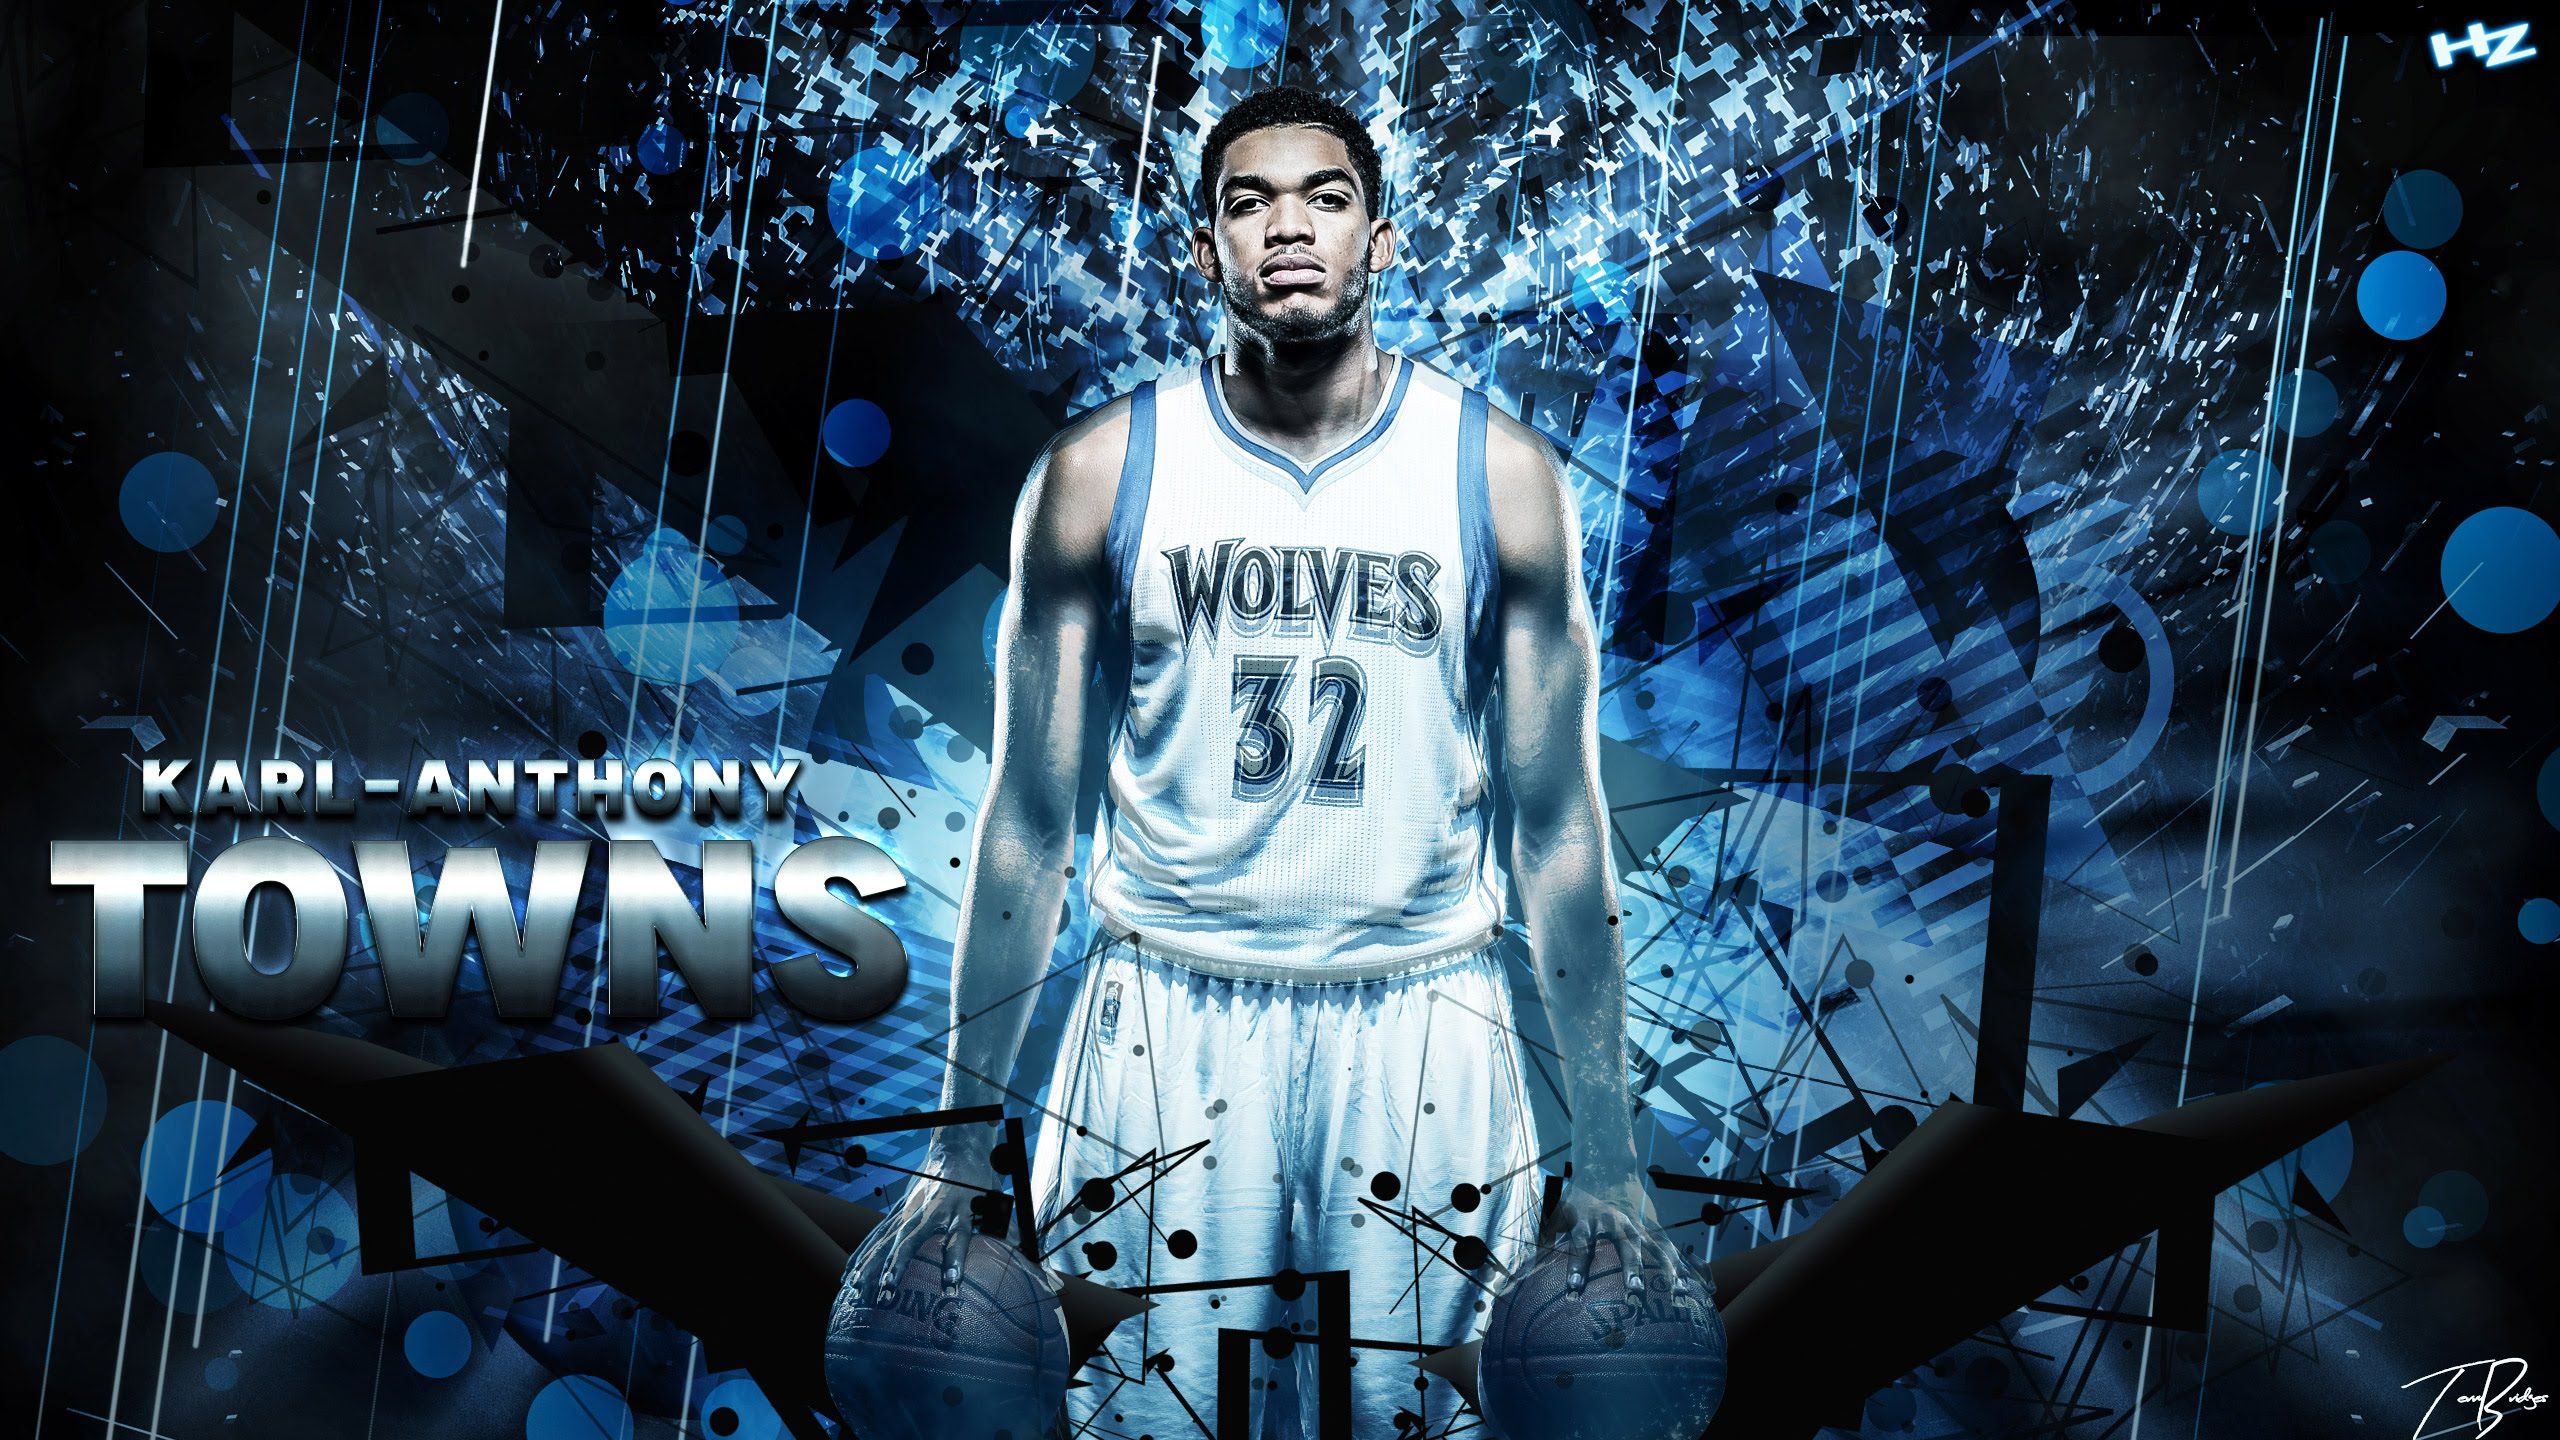 Karl Anthony Towns Mix Roty Projects To Try Fantasy